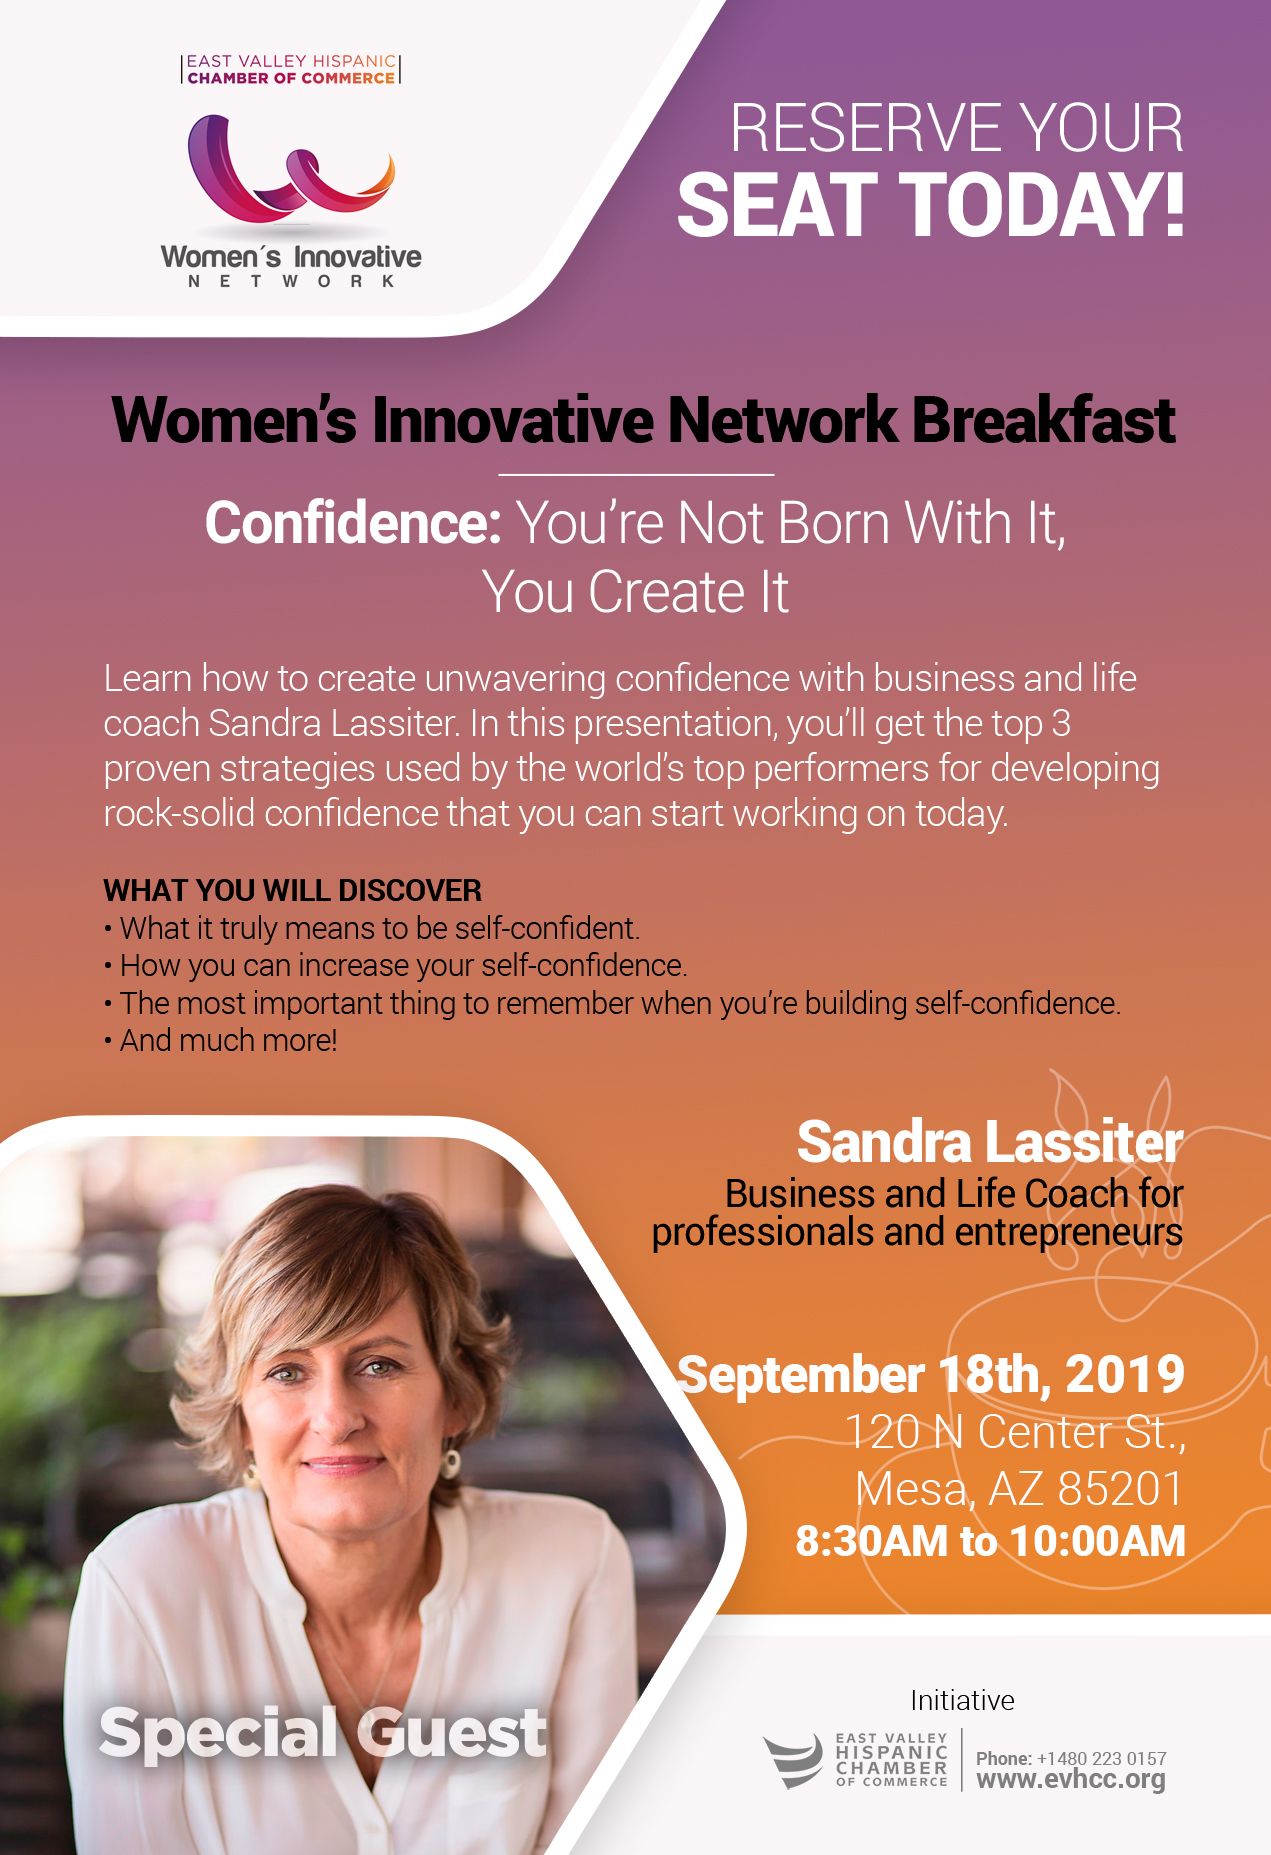 Women's Innovative Network Breakfast by the East Valley Hispanic Chamber of Commerce